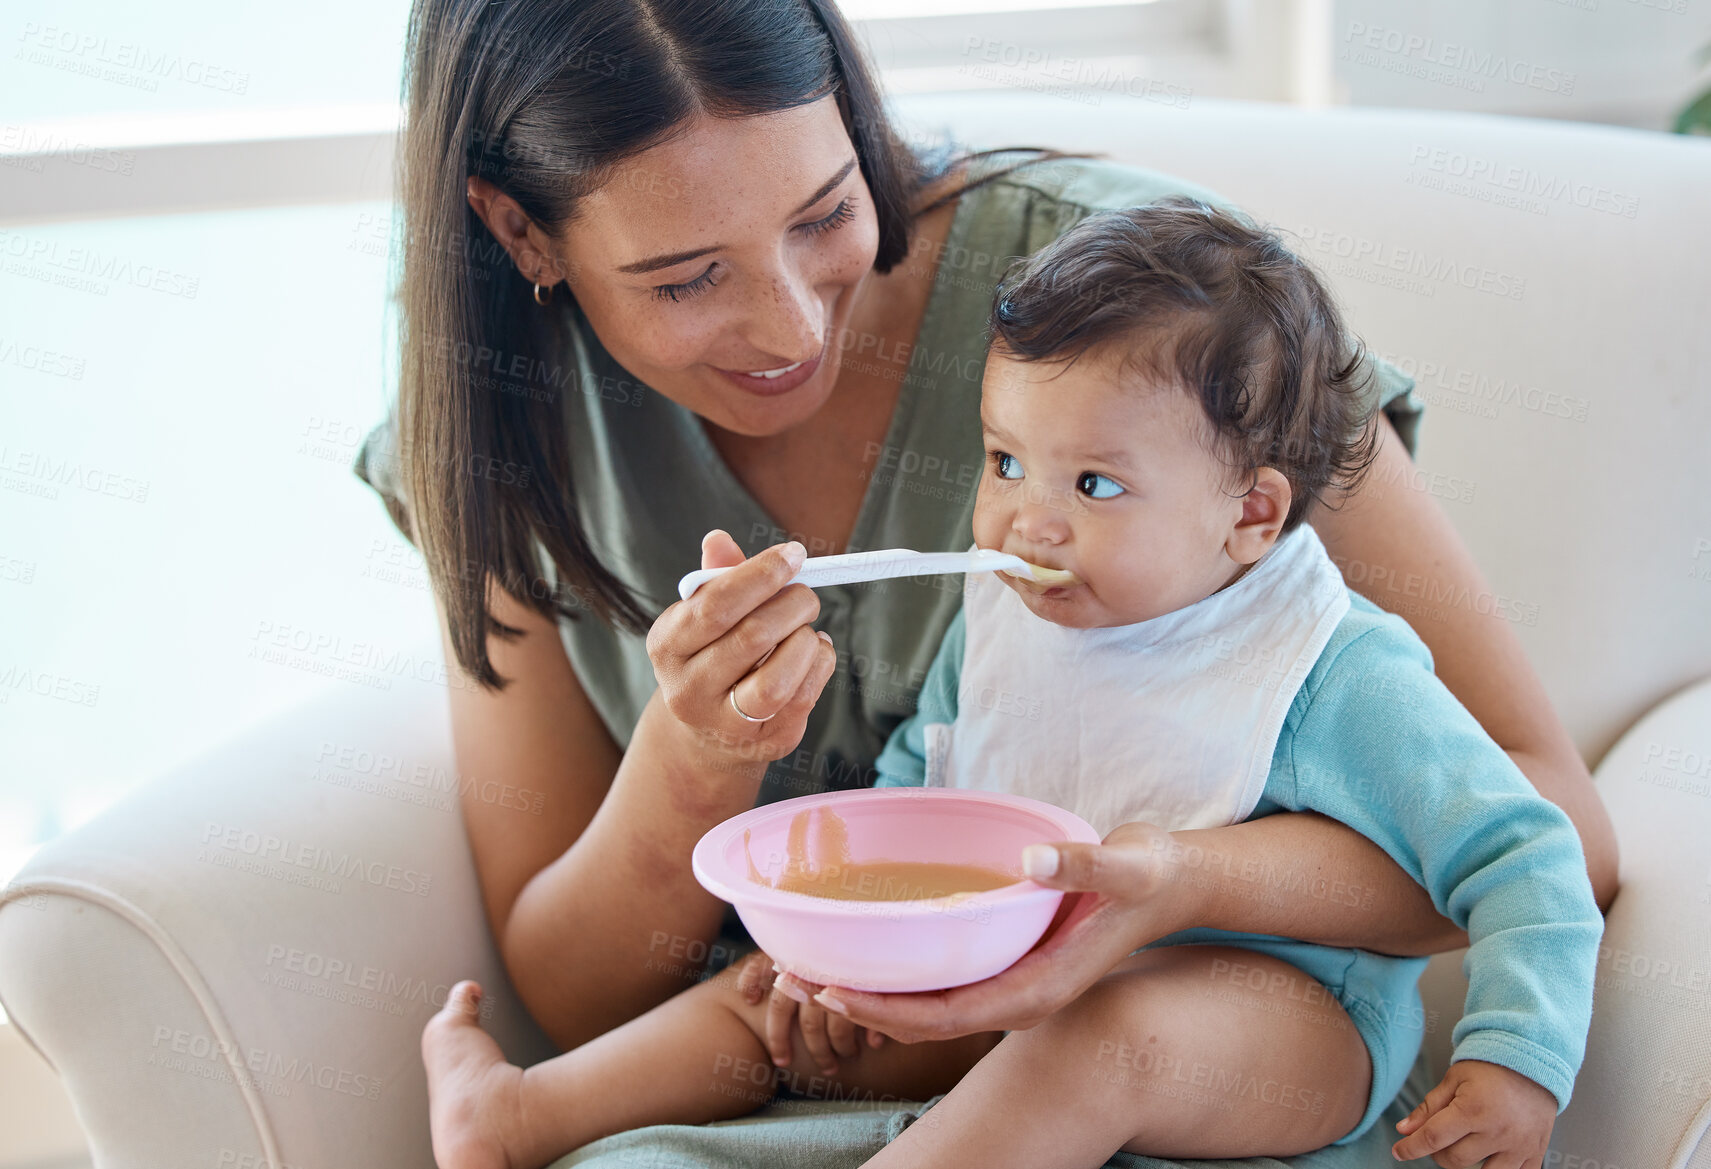 Buy stock photo Shot of a mother feeding her baby while sitting on a chair